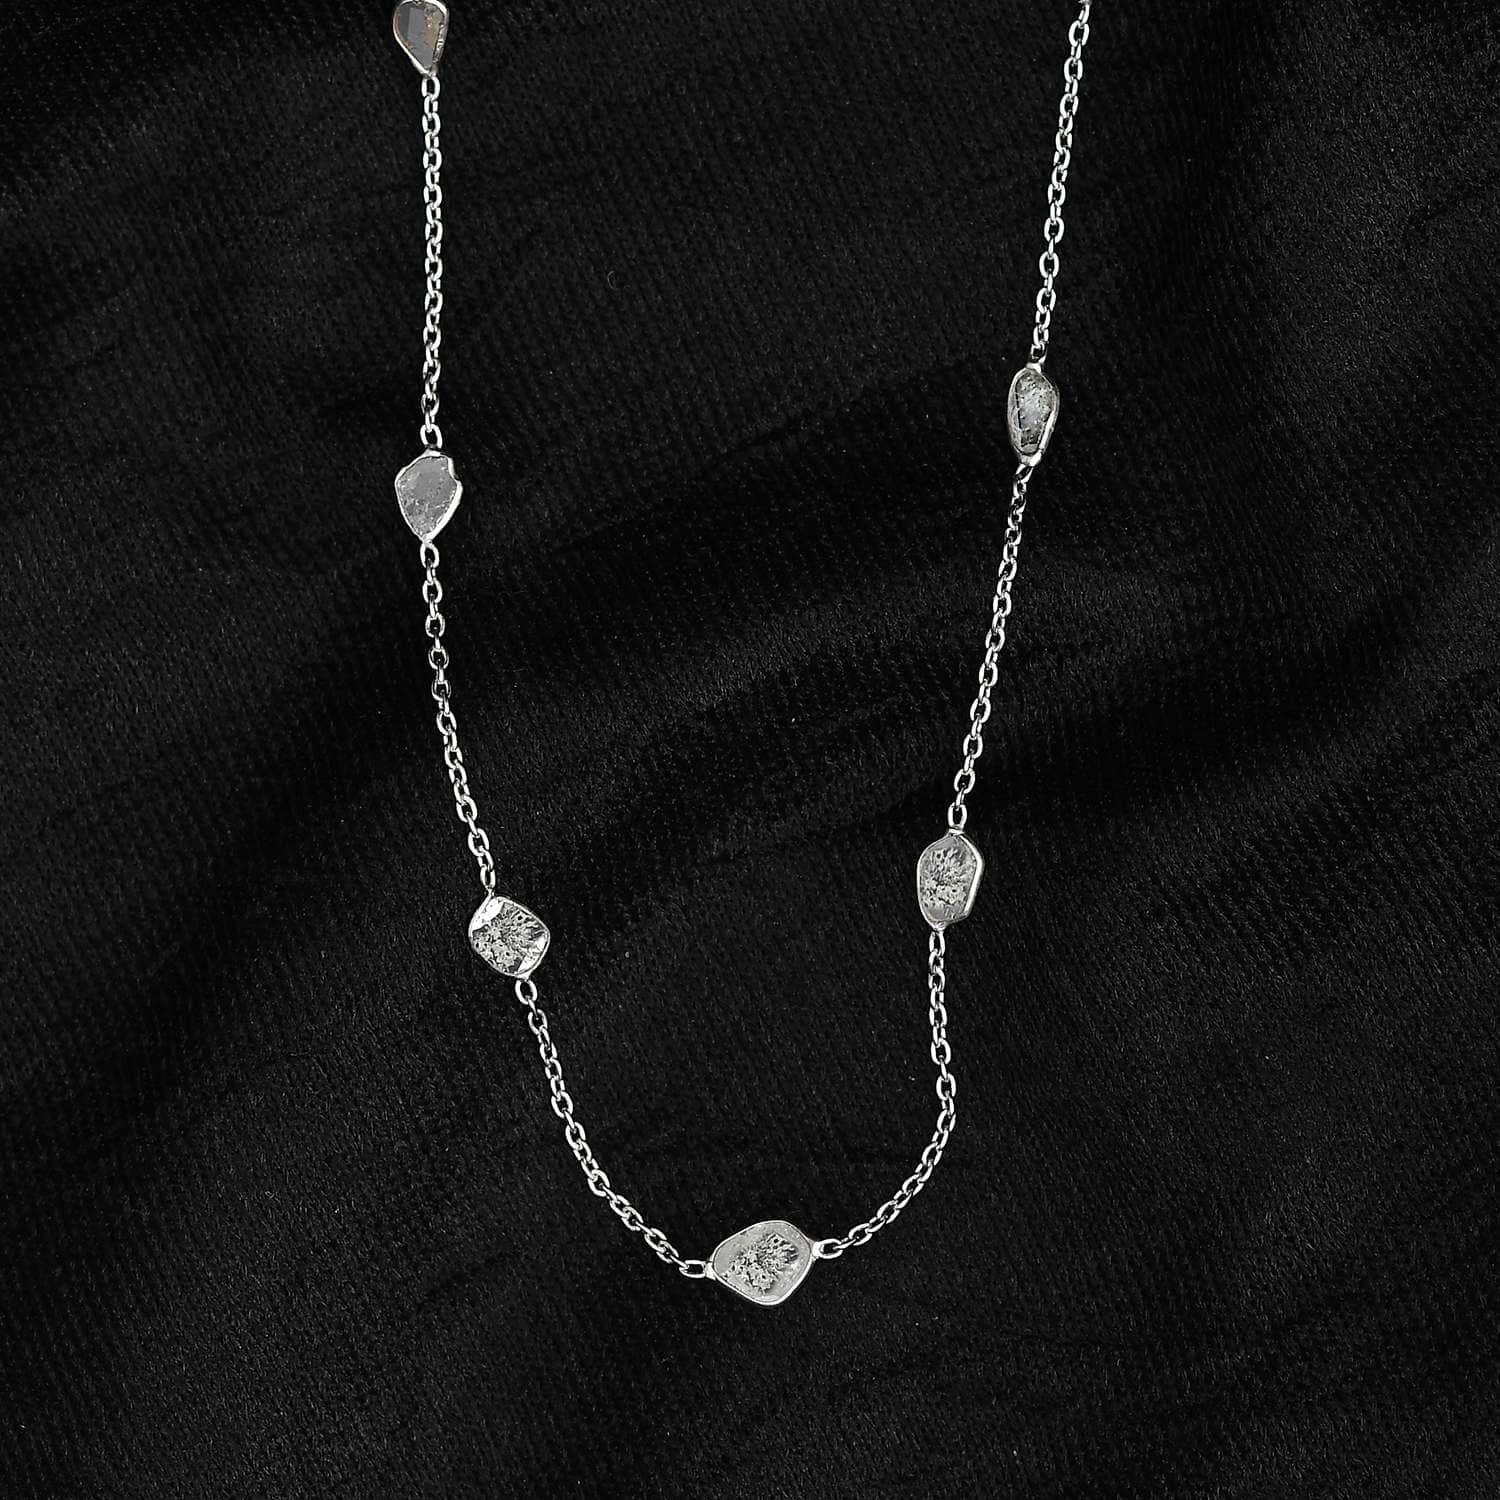 Polki Diamond Necklace in Platinum Over Sterling Silver, Diamond Station  Necklace, Gifts For Her 2.00 ctw 20 Inches